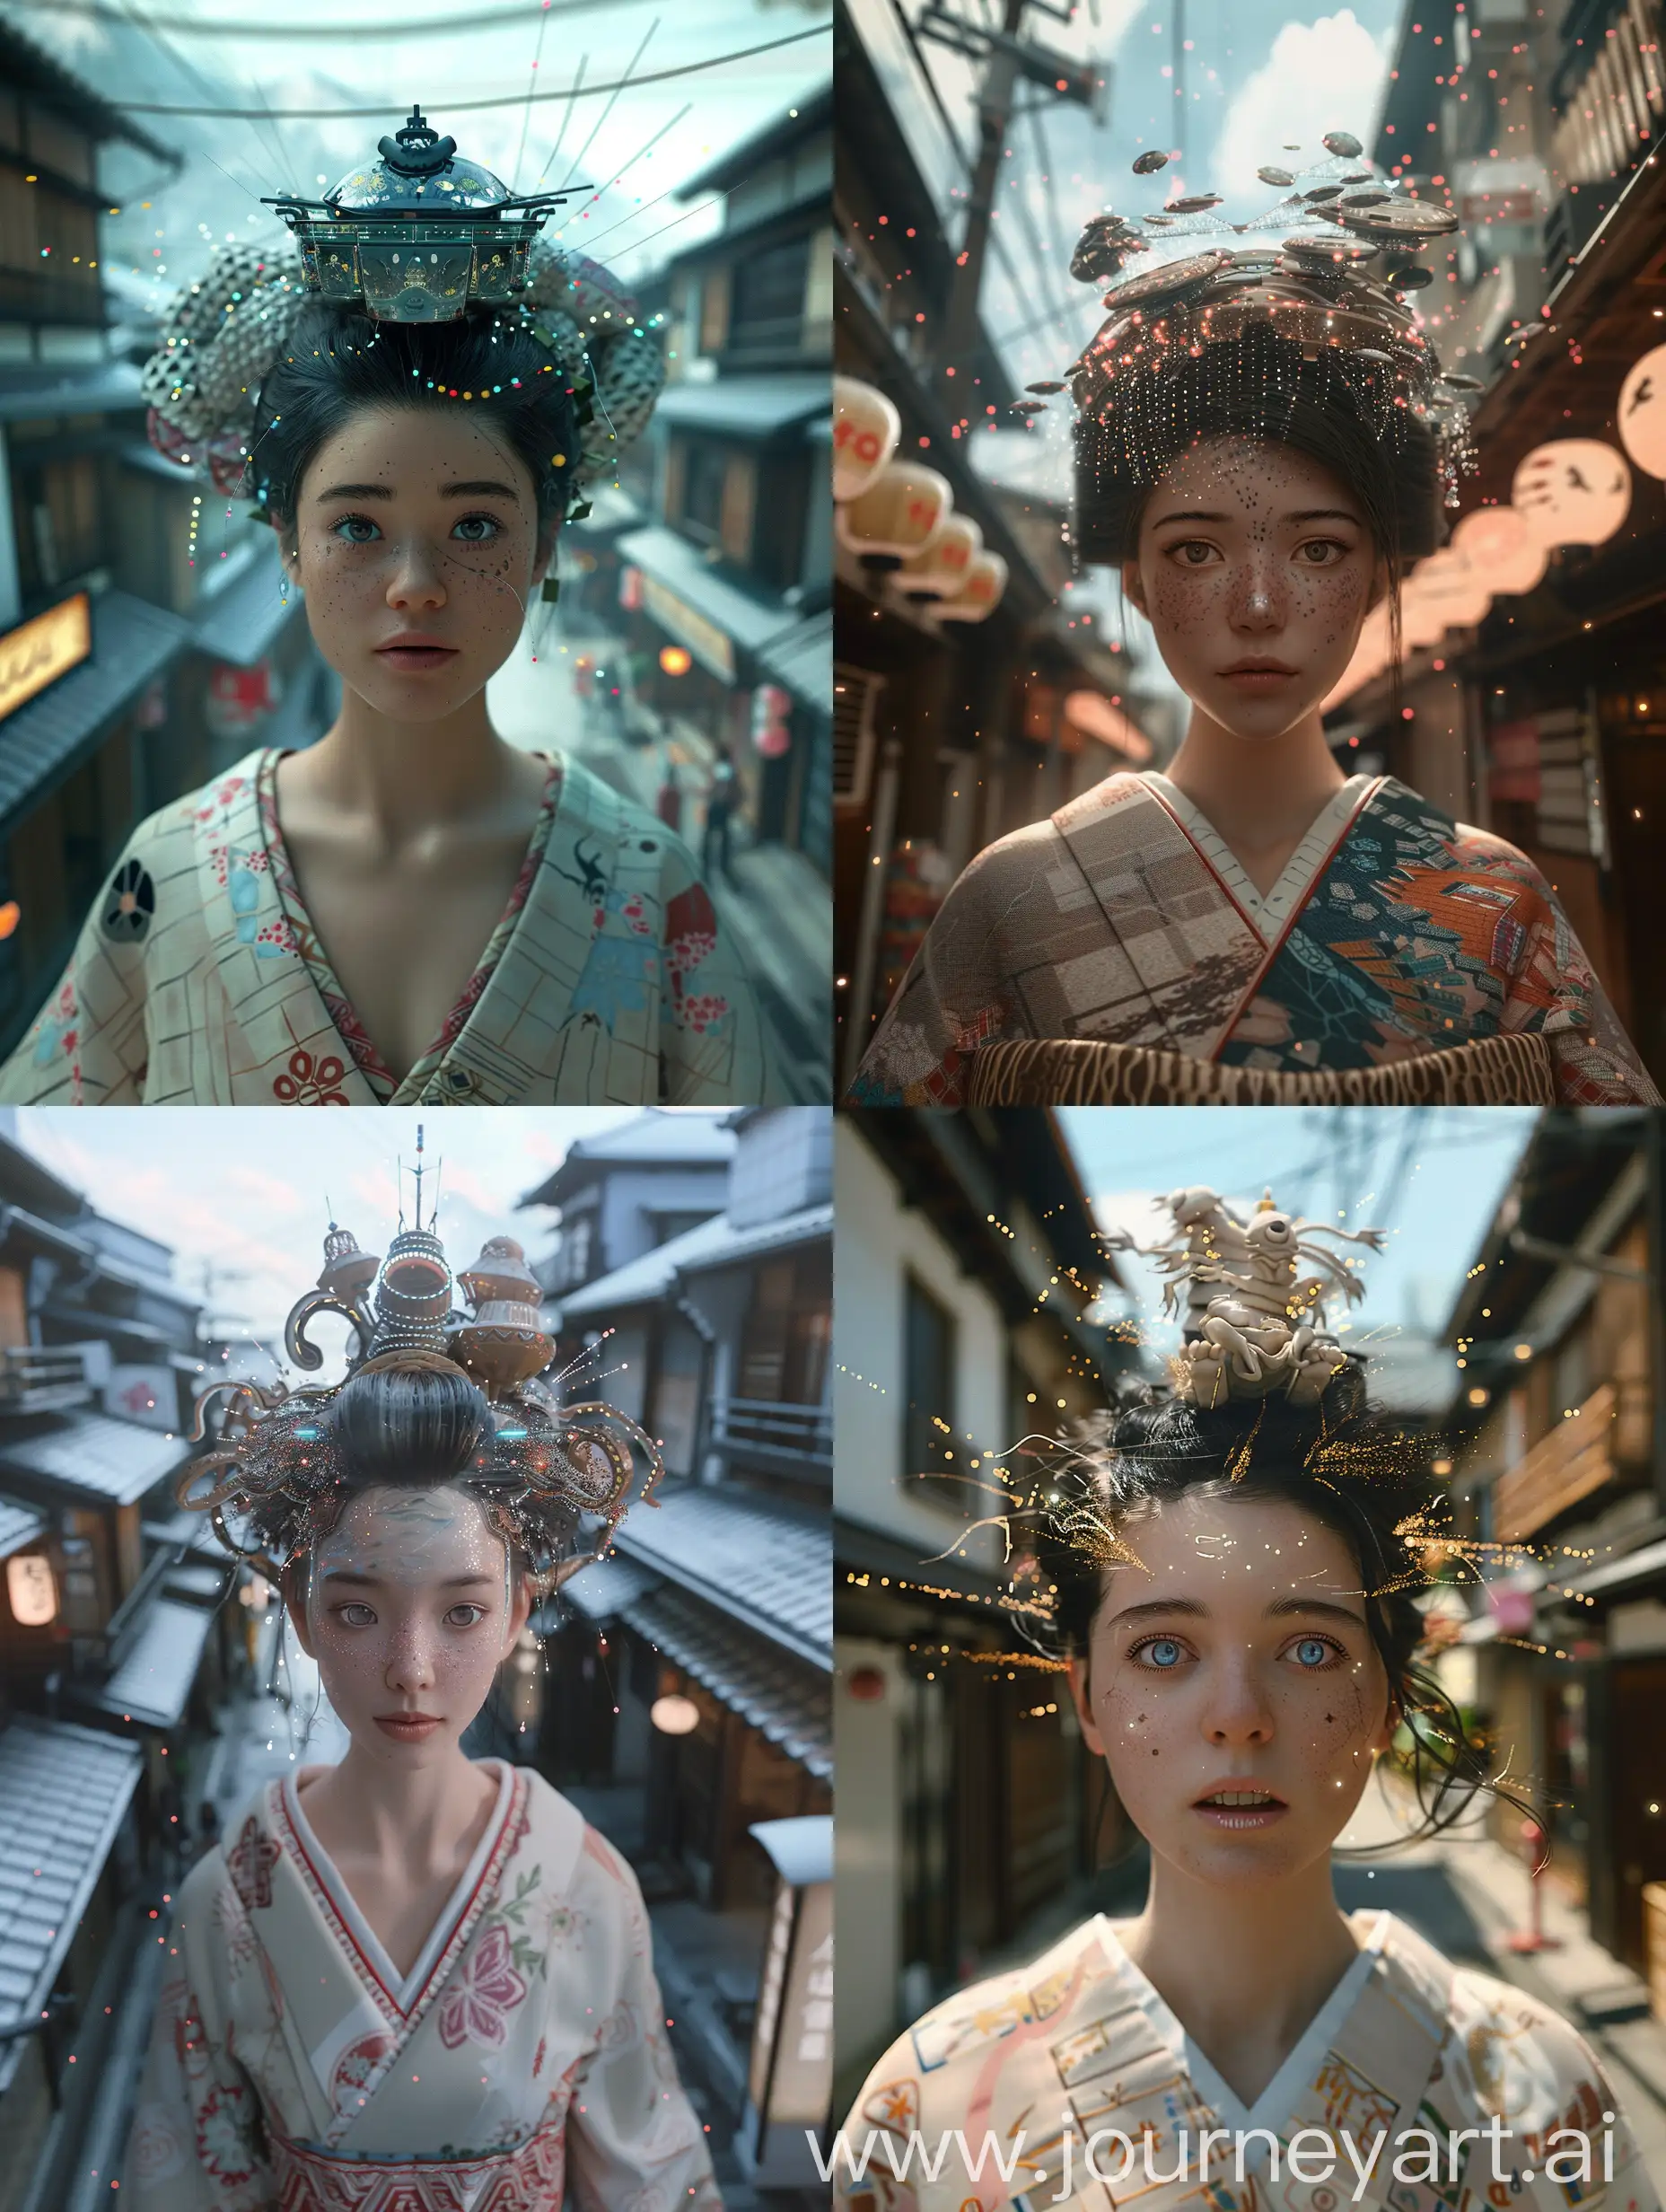 Cinematic Shot Subject: cinematic, realism, Using (((imagination))) to craft a photorealistic representation of an unusual fantasy dream, a wide-angle lens, A world full of fantasy, shot from high altitude, wide-angle lens, describing the real Japanese streets, yokai appeared in the sky, she is a Japanese singer, wearing a Japanese kimono, her head is combined with a weird demon spaceship, Amazing, shocking, Mysterious, Coffinwood, drawing, Polaroid, 3D modeling, Contrasty, tiles, ivory colors, Memphis, magic sparkles lighting, skillfully captured through an EE 70mm lens, providing a professional movie feel. The UHD camera captures every detail of this moment, highlighting the colors and textures. With Scorsese's expert direction, this scene exudes drama, Generate a cinematic and highly detailed Al image, Render her in a photorealistic style, cinematic, capturing the fine details of her features and surroundings. Pay close attention to realistic skin tones, textures, and lighting conditions. Ensure the image is in high resolution, such as 8K, to showcase the intricate details and allow